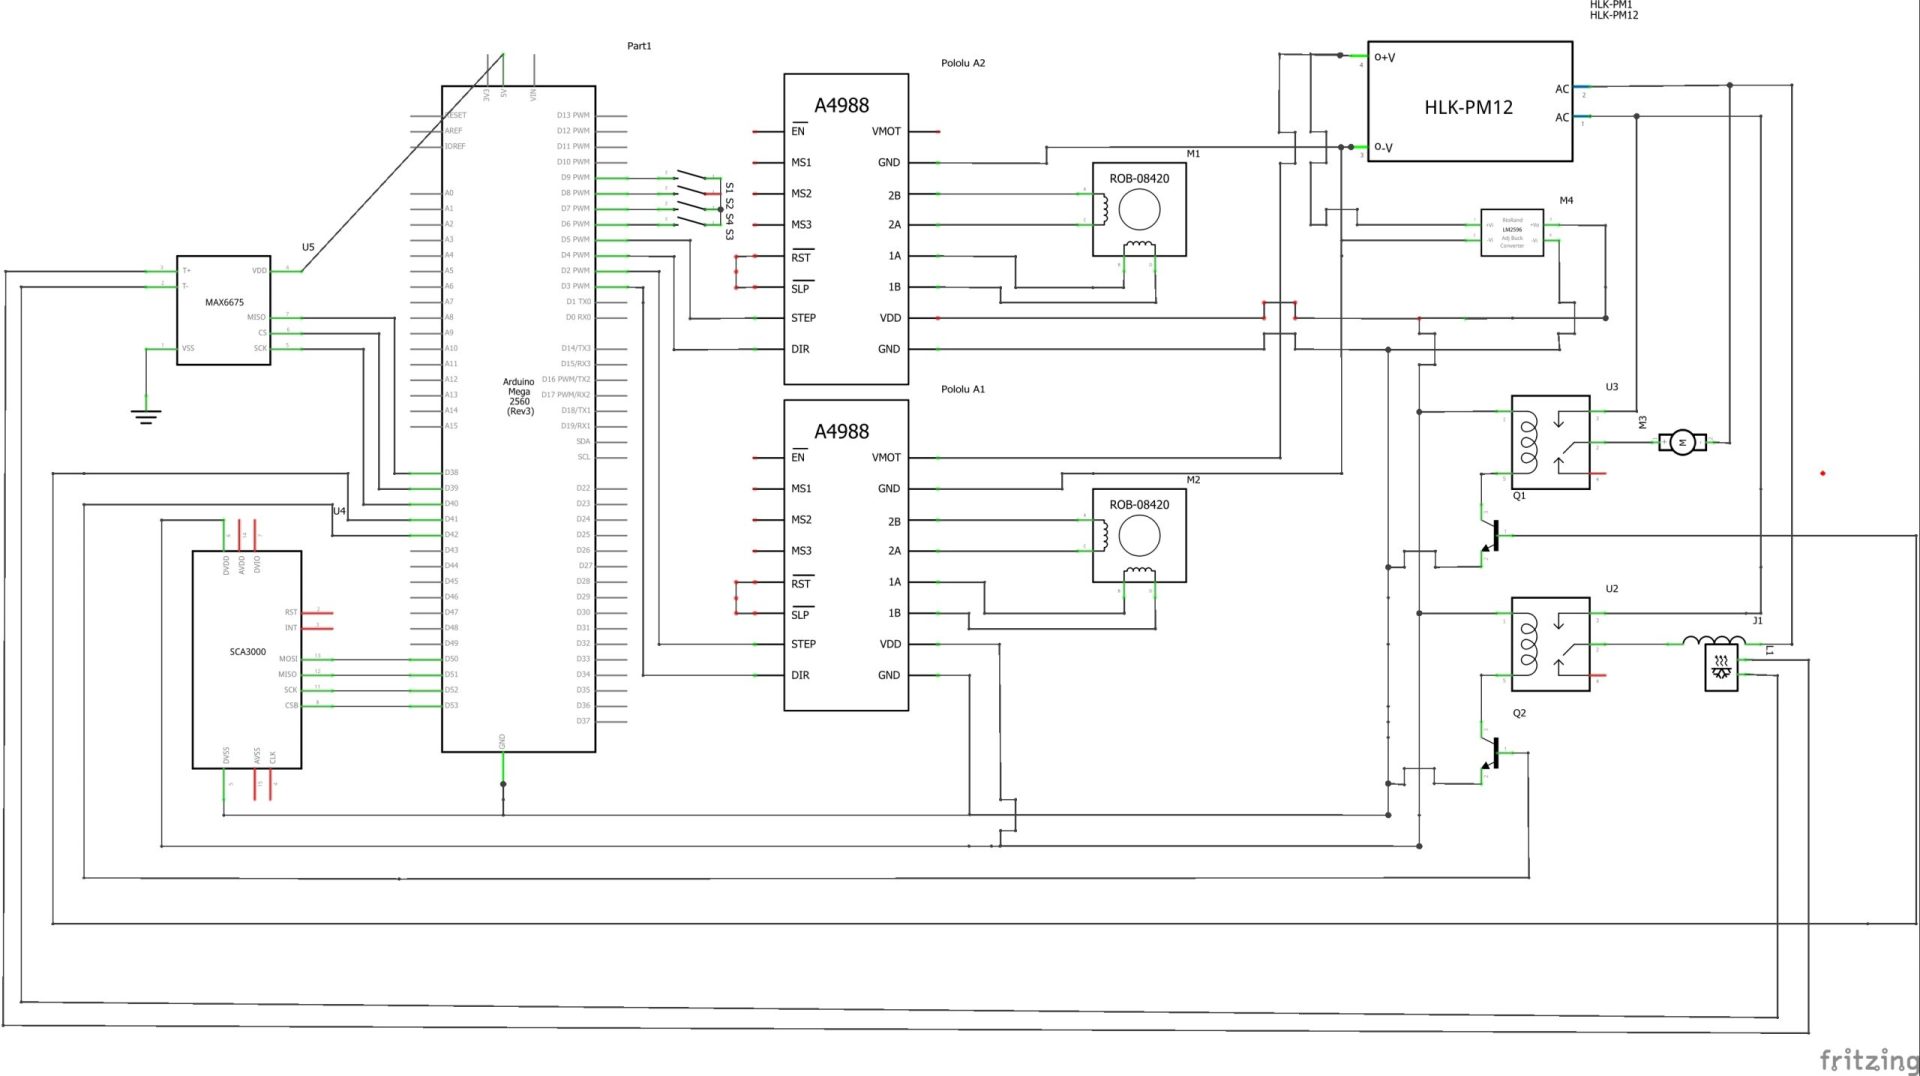 RFID-based access control with disinfectant booth: the circuit diagram